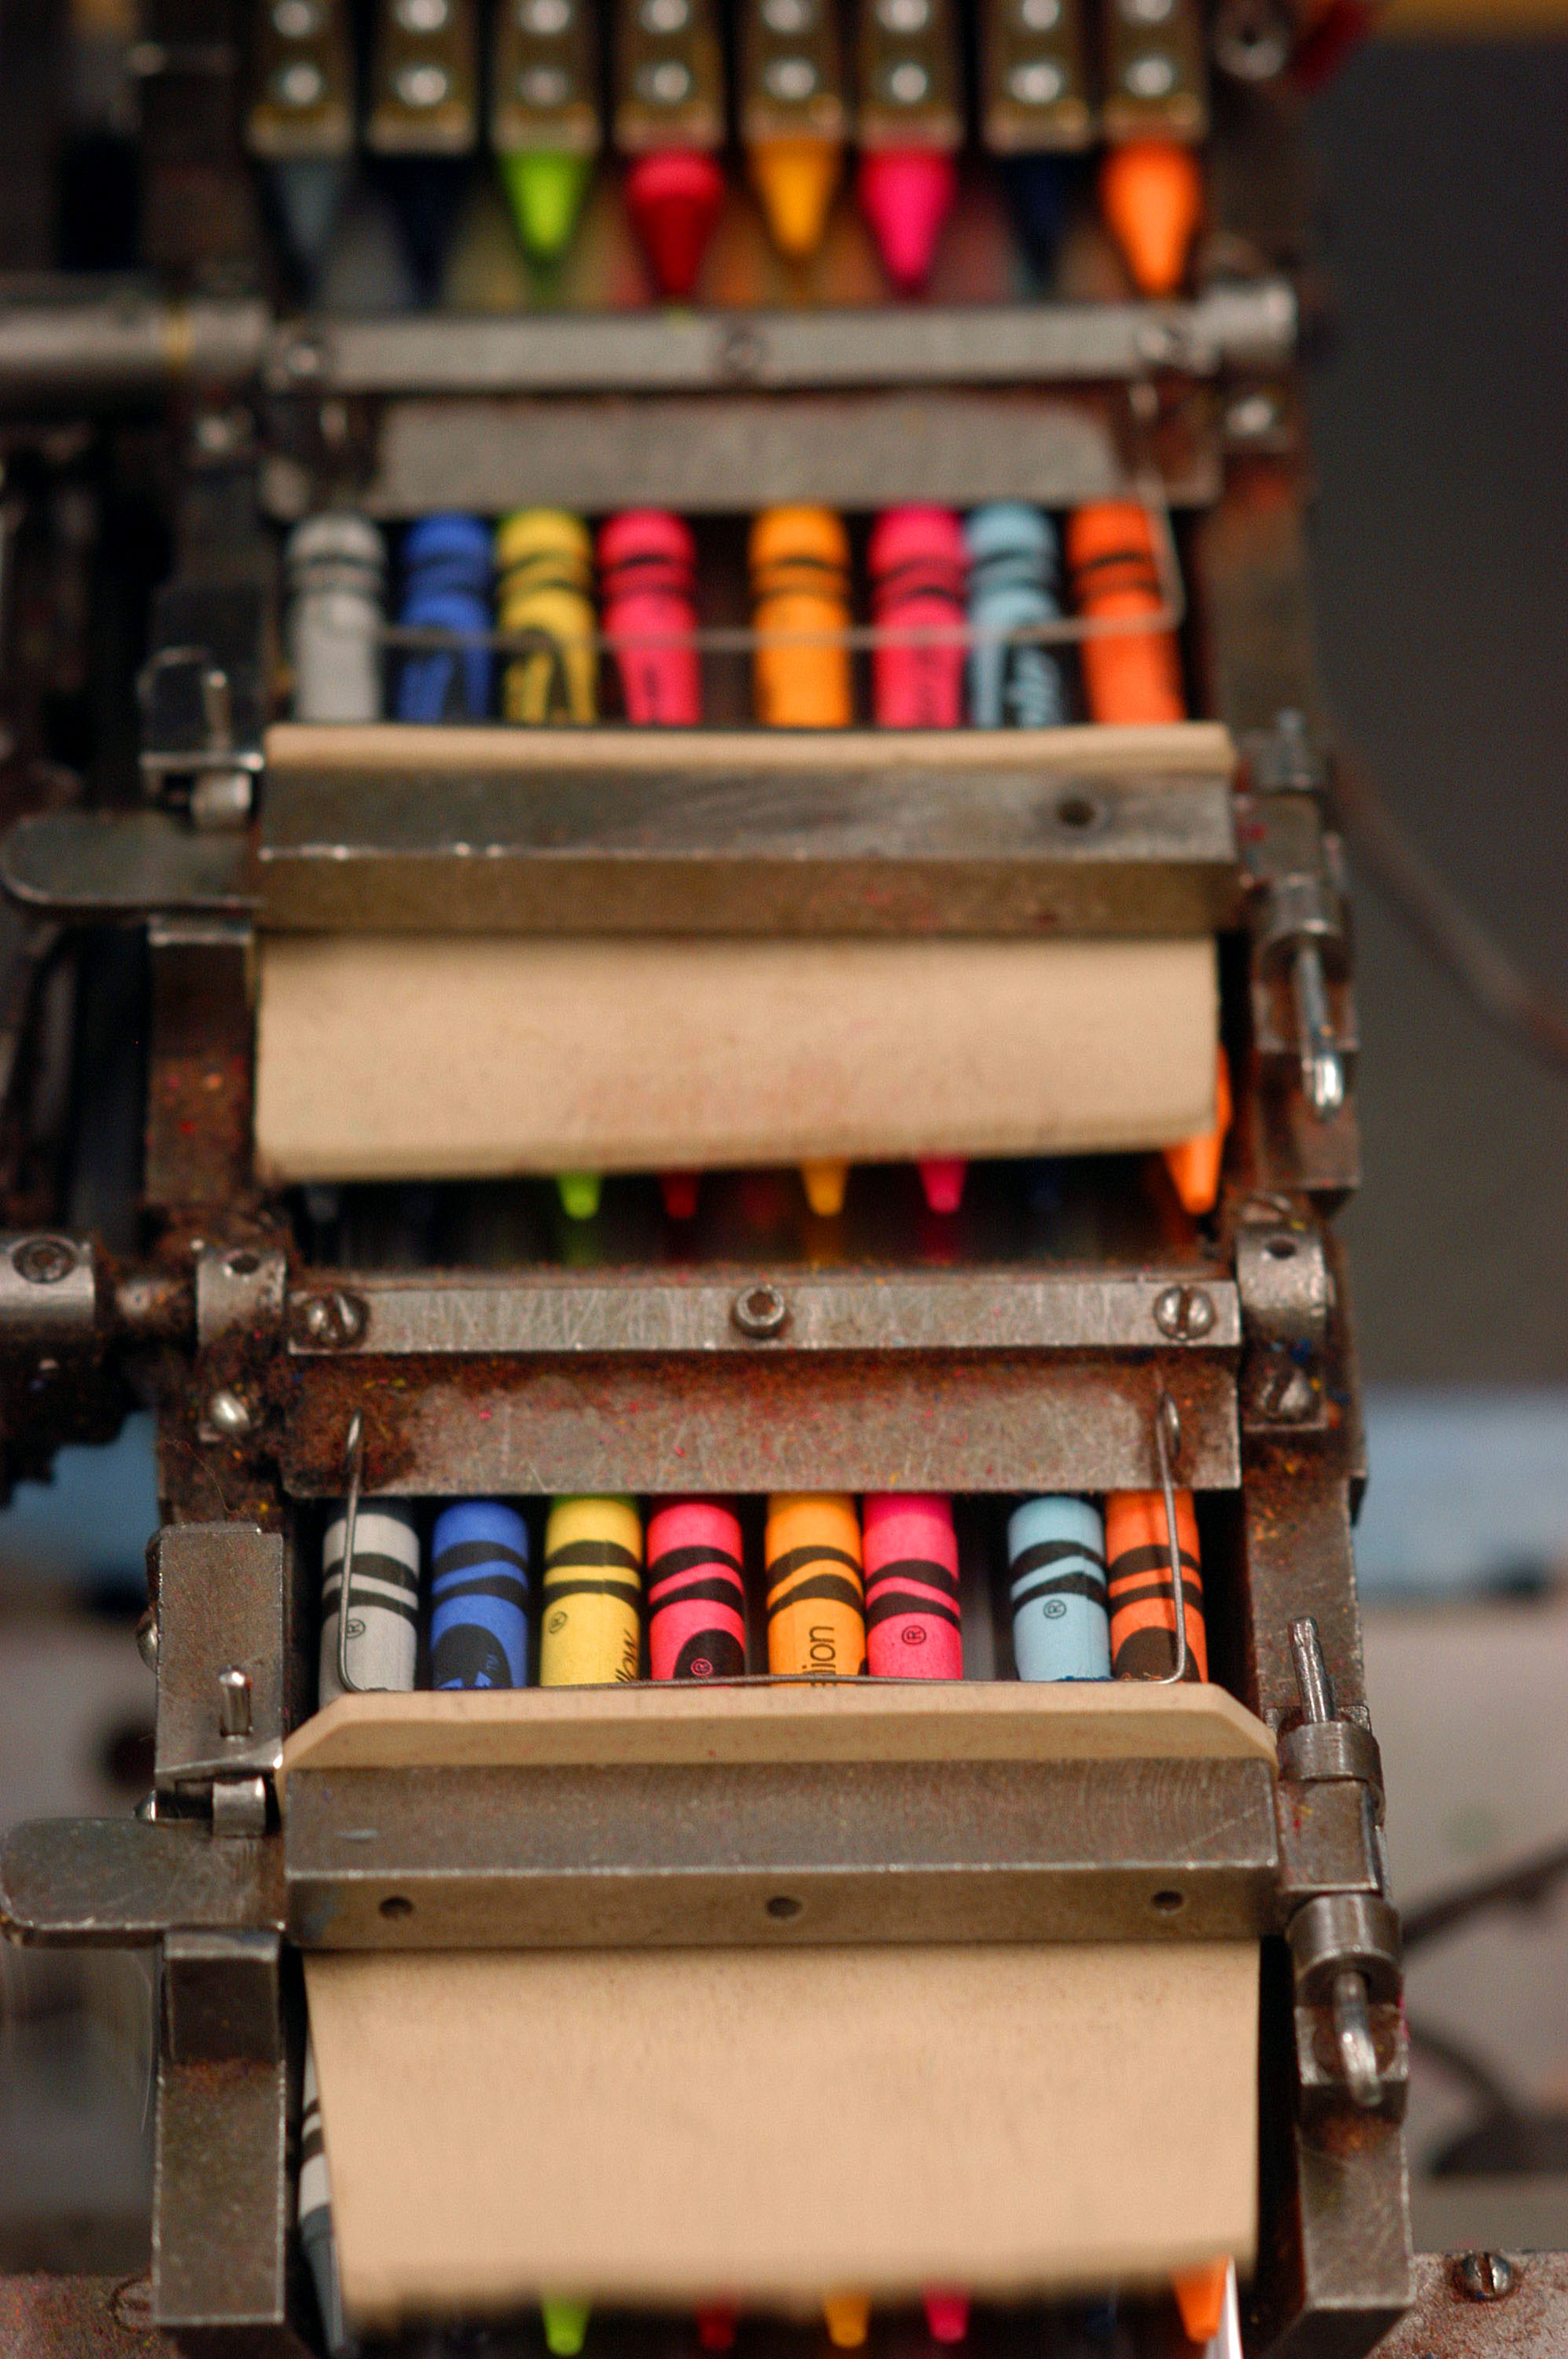 Crayons are packaged by machine at Binney and Smith, Inc., the manufacturer of Crayola crayons, June 18, 2003 in Easton, Pennsylvania. (William Thomas —Getty Images)